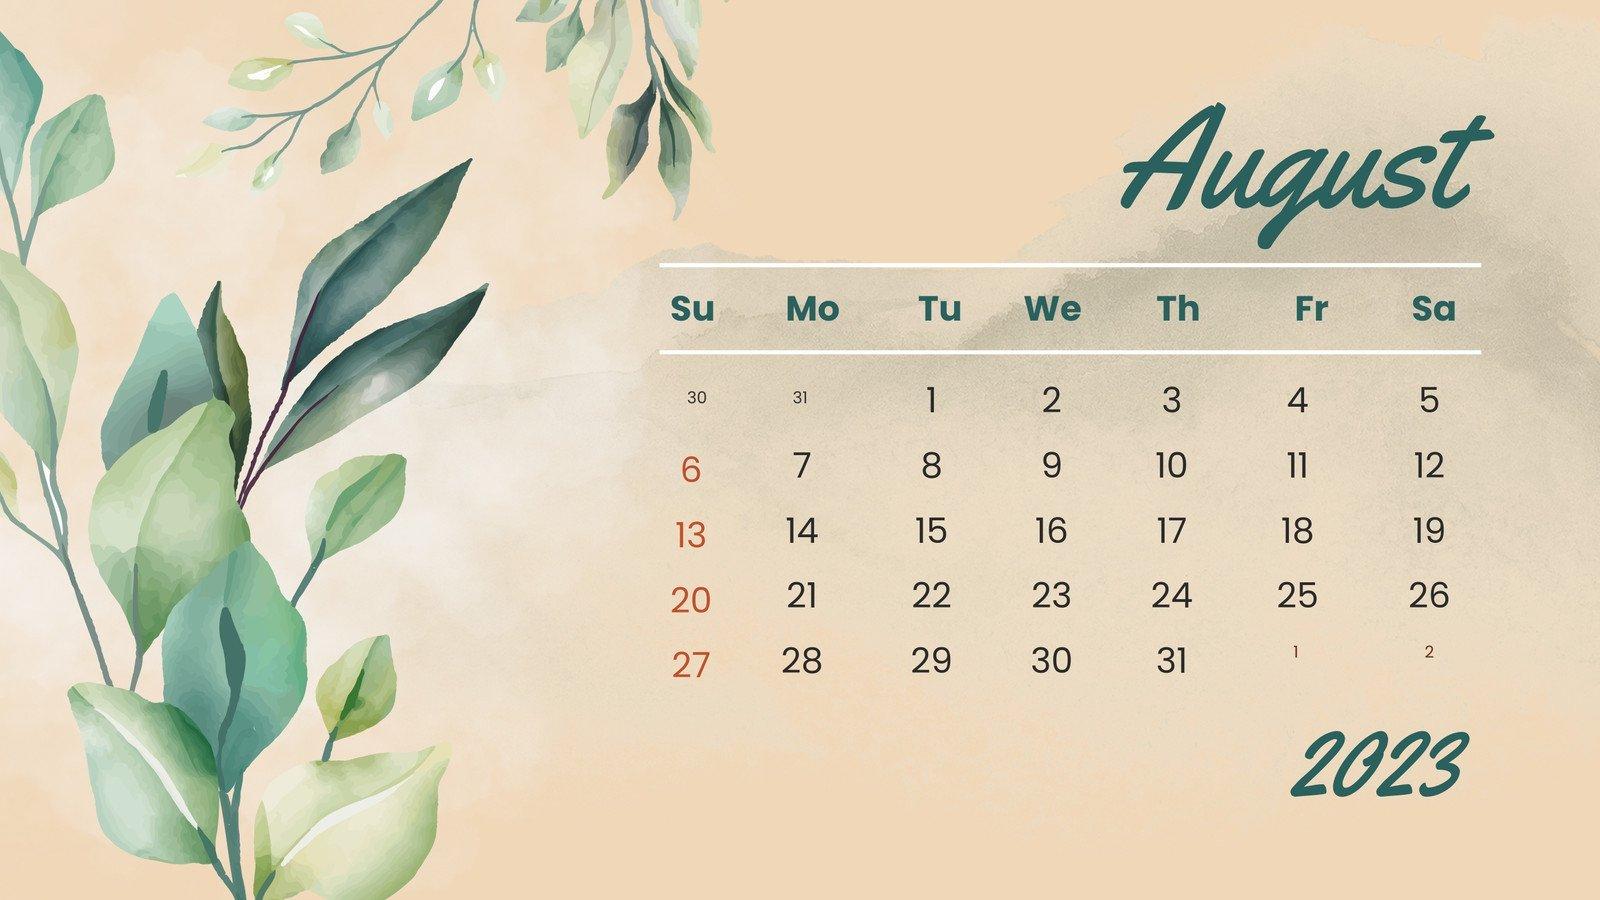 August Wallpaper Explore more 31 Days August Gregorian Holiday month  wallpaper httpswwwwhatspaper  August wallpaper Calendar wallpaper  Summer wallpaper